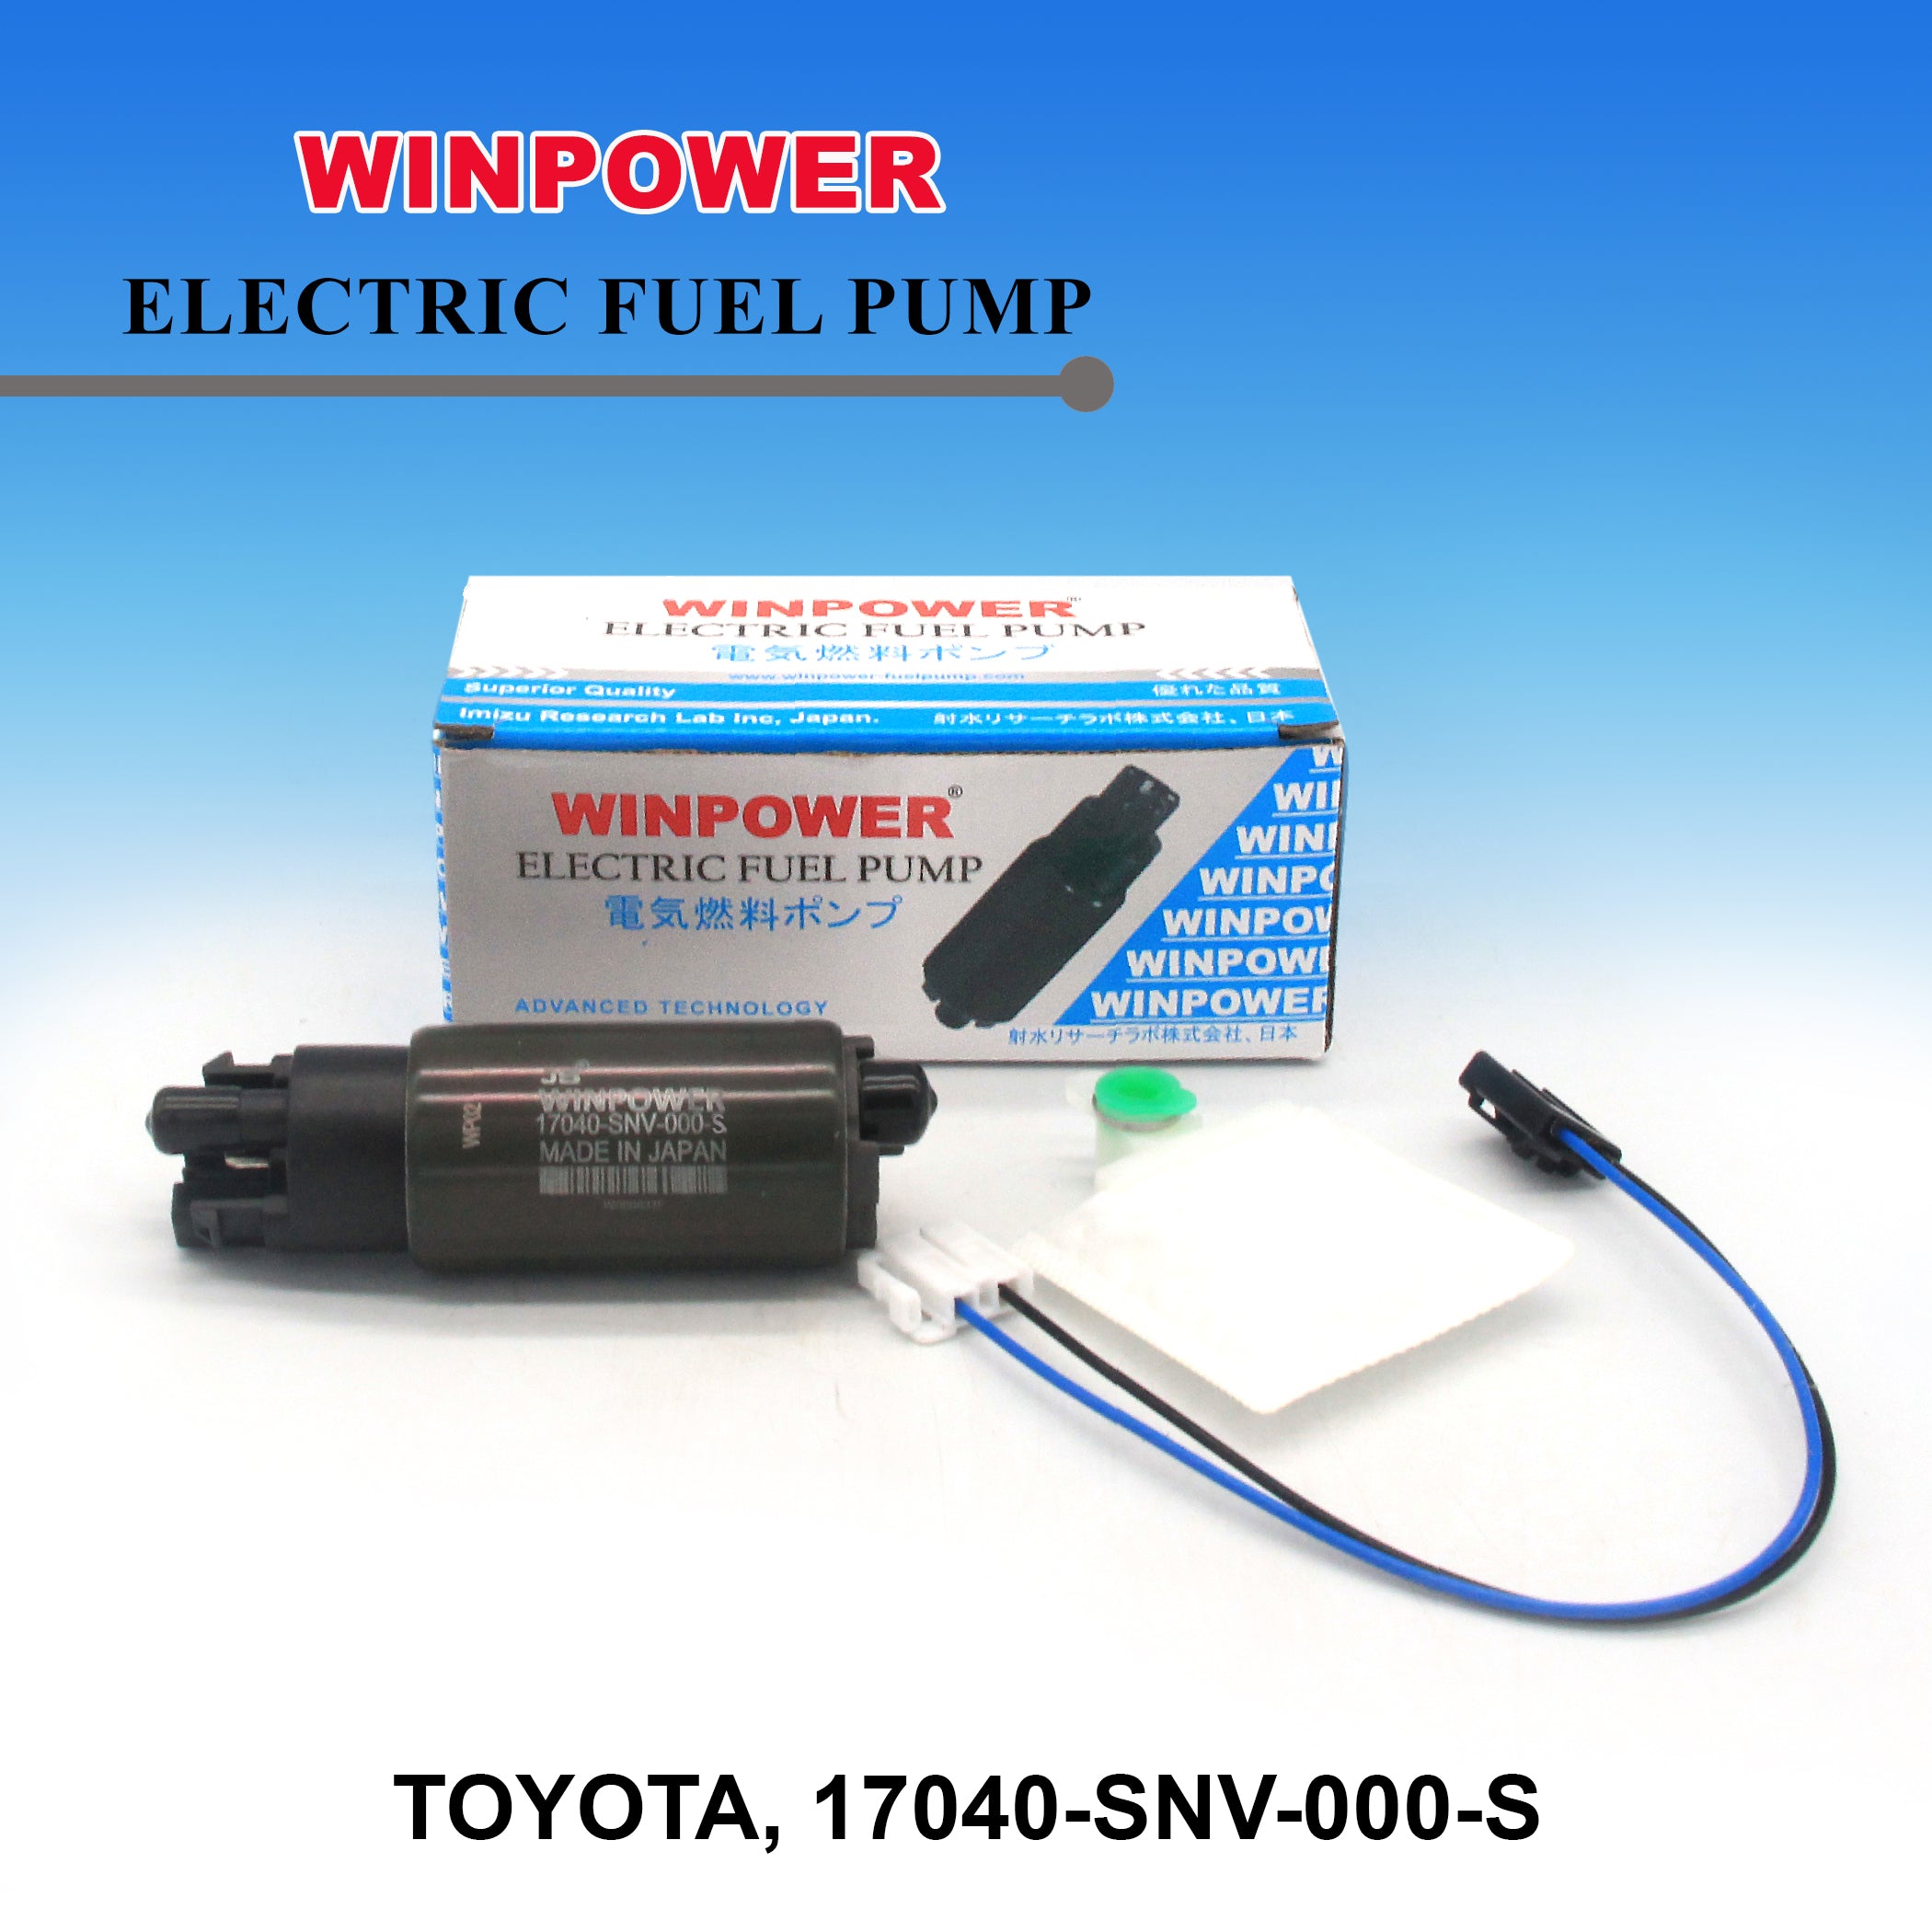 In-Tank Fuel Pump, WINPOWER, Small Pin, 17040-SNV-000-S, WF-3827 (005540)